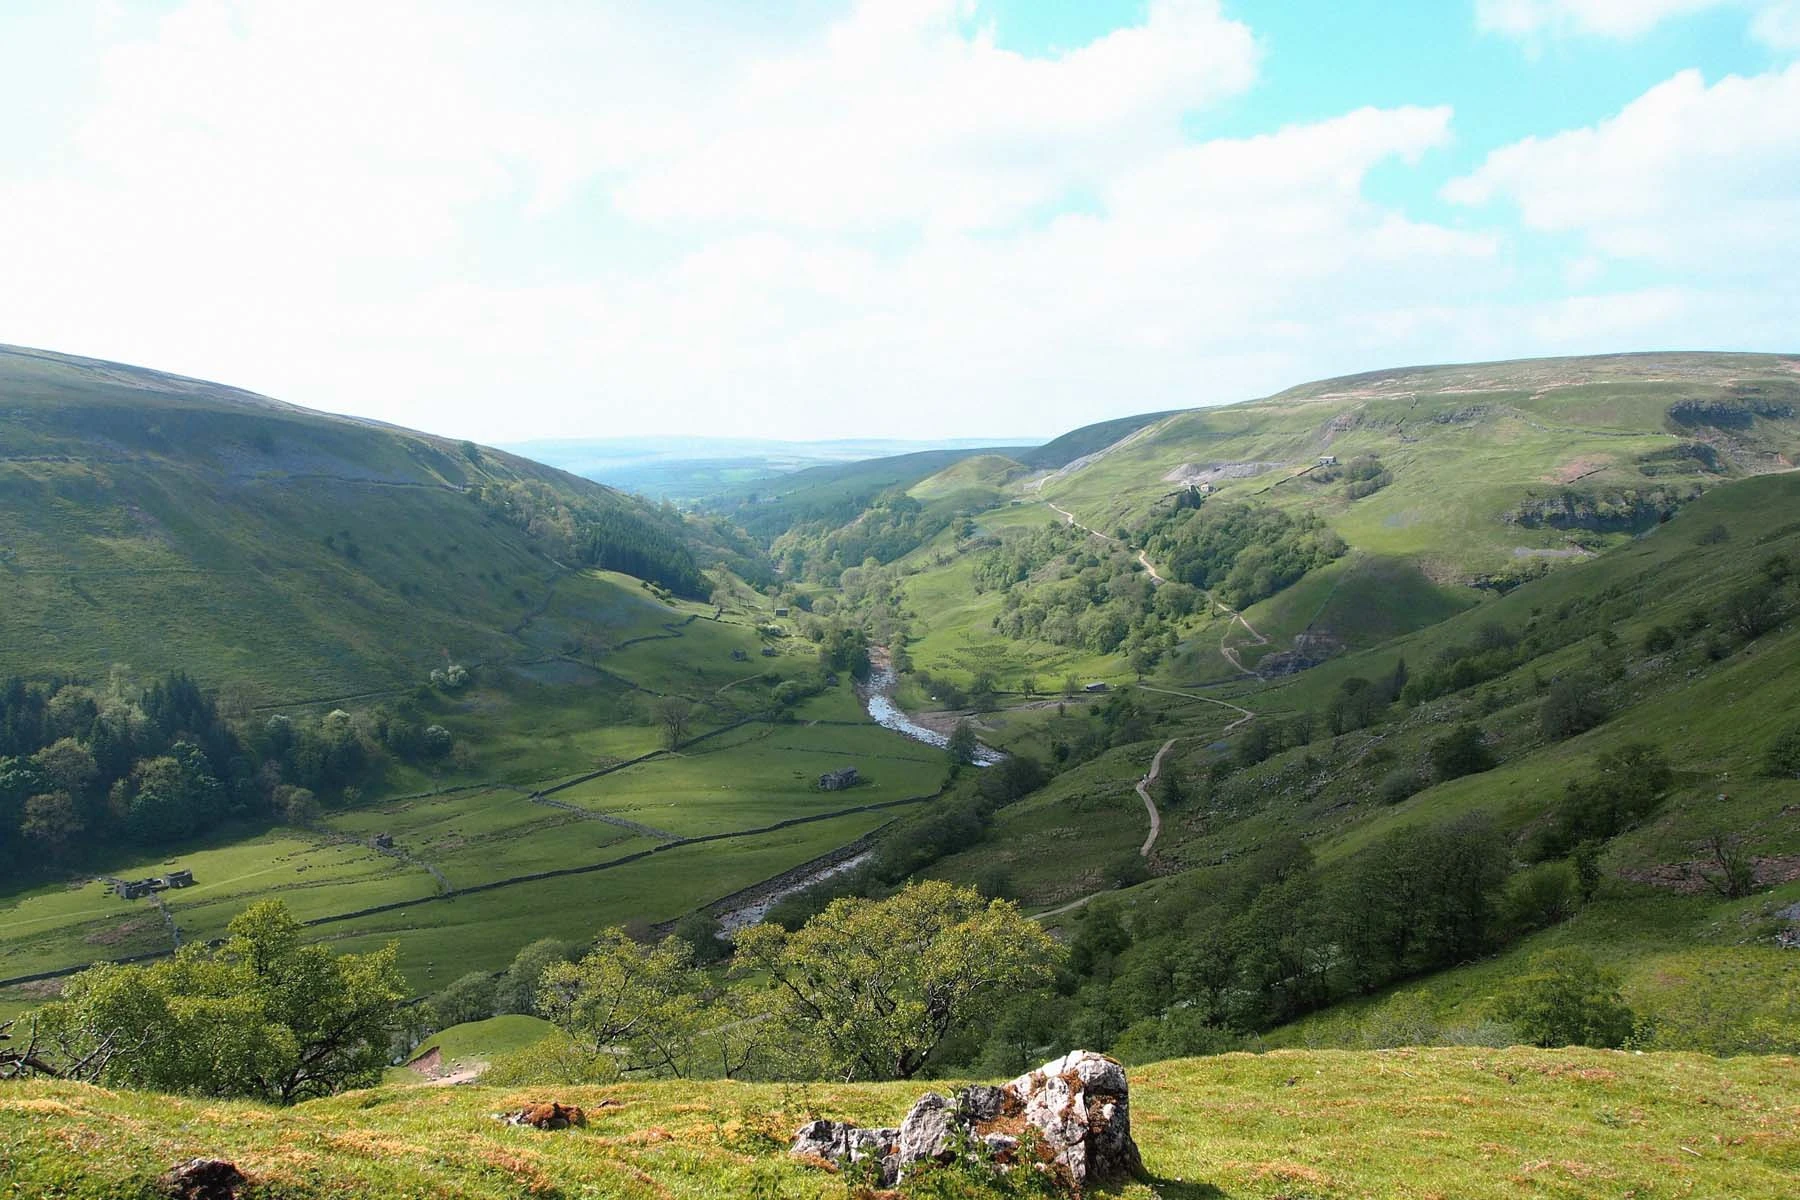 Beautiful views across the Yorkshire Dales, North Yorkshire